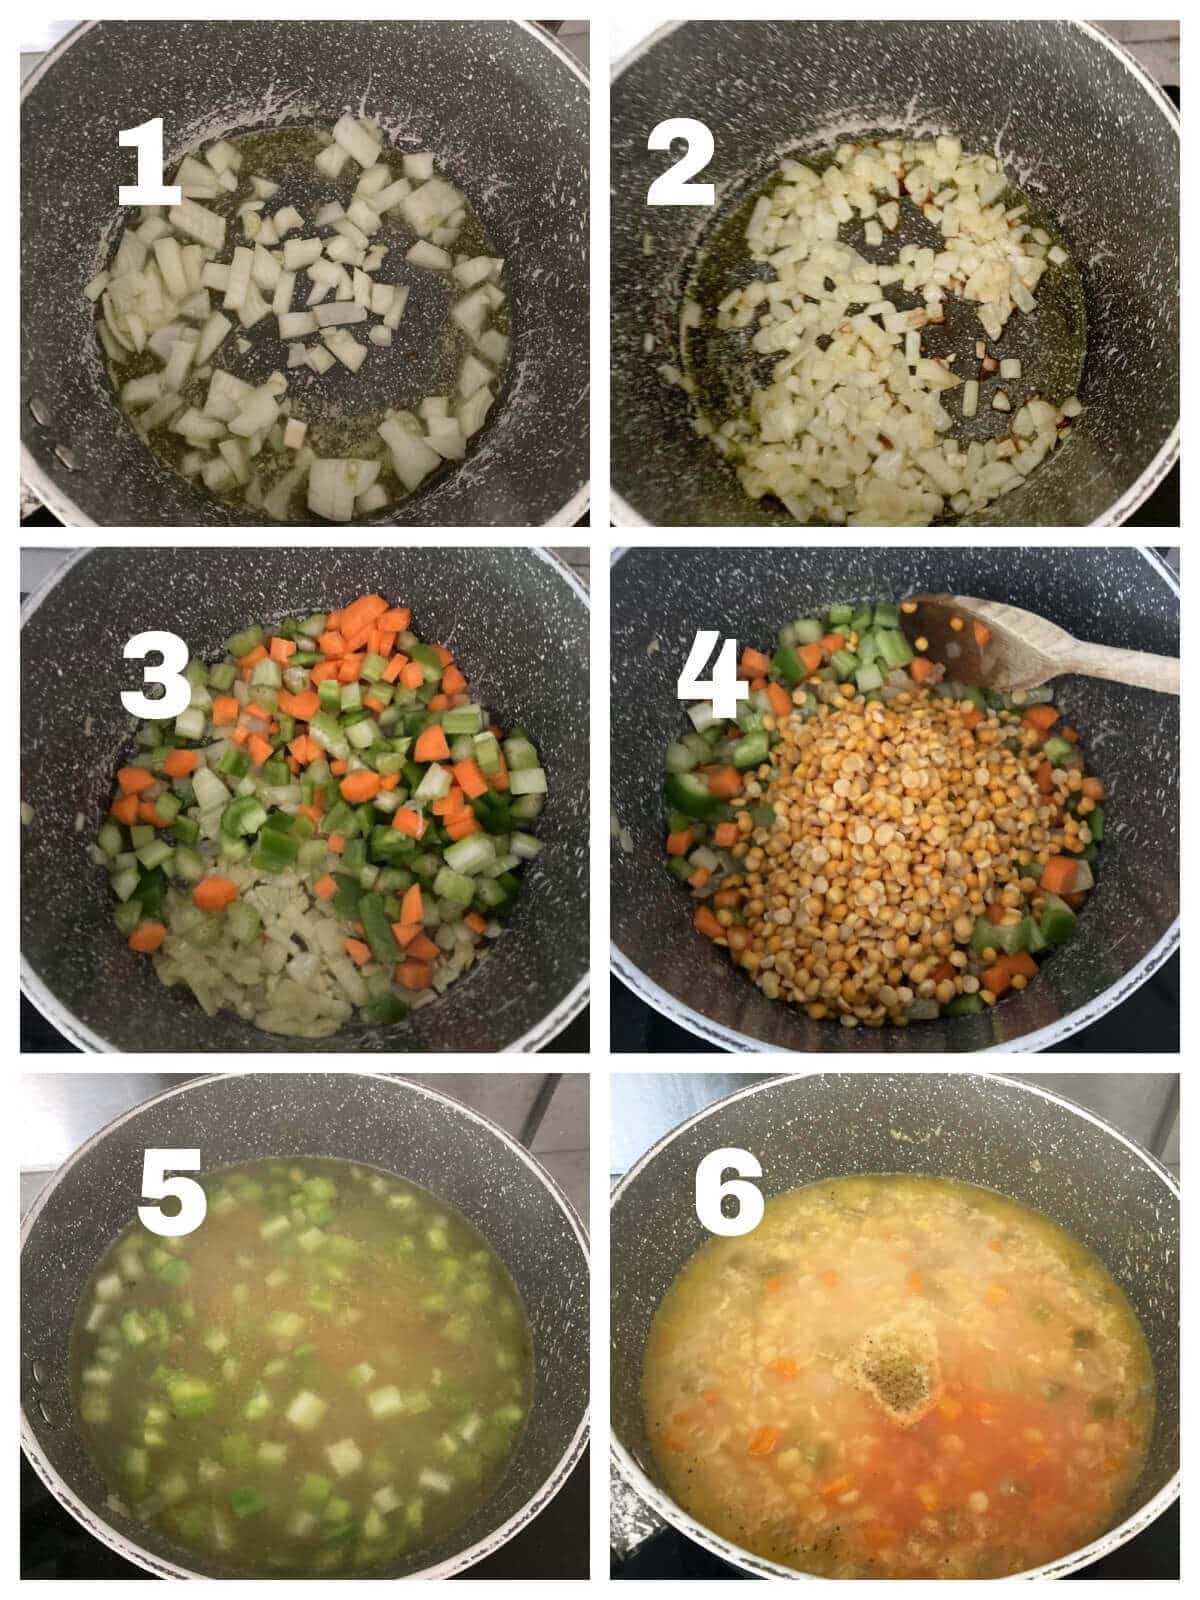 Collage of 6 photos to show how to make yellow split pea soup.